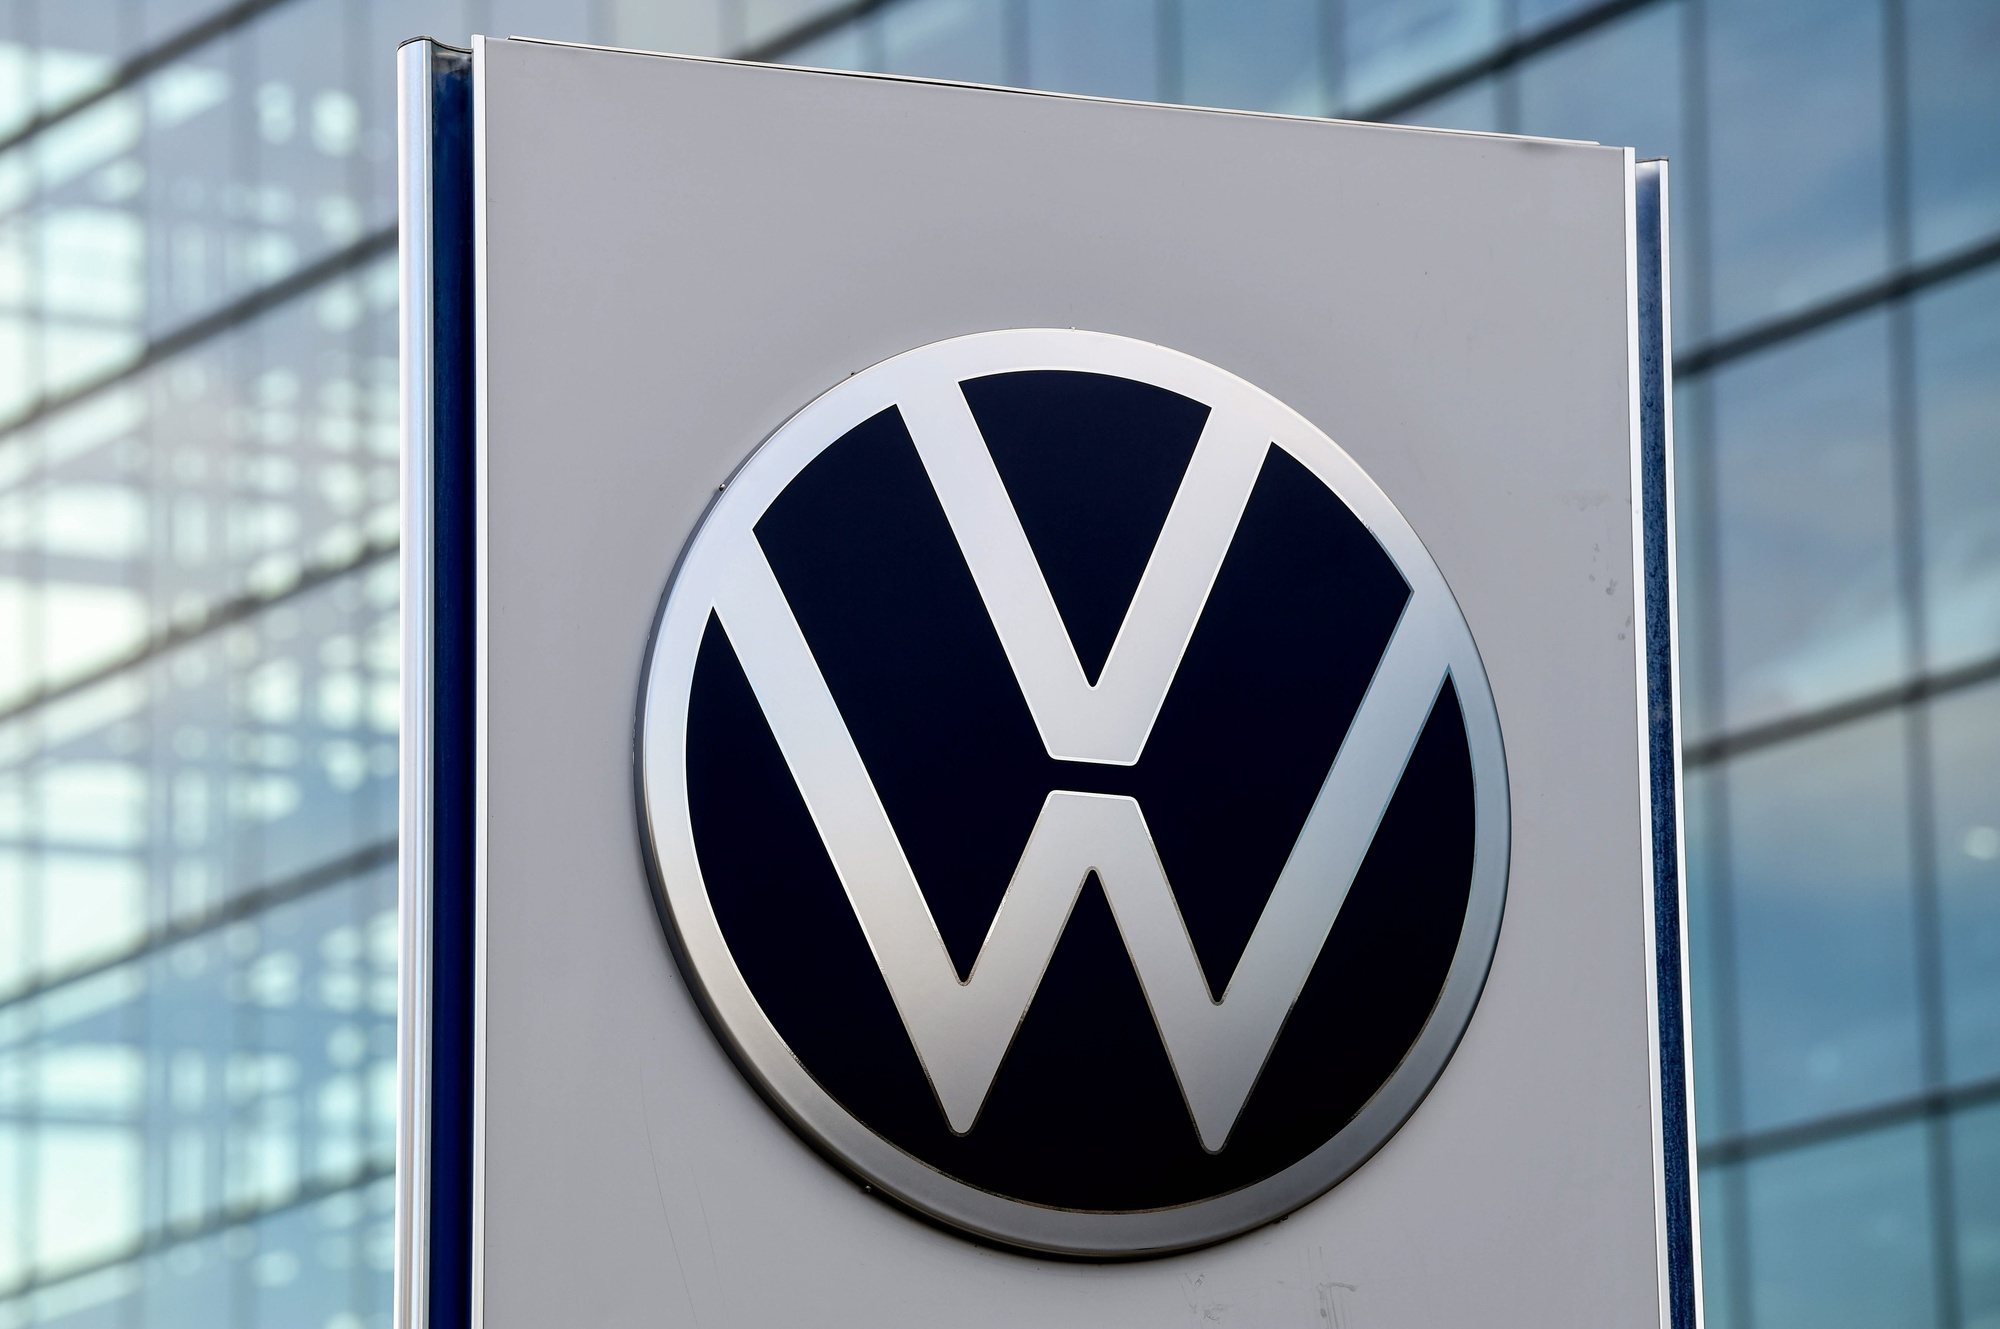 epa08574615 (FILE) - A Volkswagen (VW) logo in front of the Volkswagen Glaeserne Manufaktur (Transparent Factory) in Dresden, Germany, 19 November 2019 (reissued 30 July 2020). Volkswagen on 30 July 2020 released their  first half-year 2020 results, saying their operating result before special items dropped to –0.8 (10.0 in 2019) billion euro while the Group sales revenue decreased by 23.2 per cent to EUR 96.1 billion Euro in 2020. Volkswagen cited a sharp fall in customer demand as Covid-19 pandemic kept customers away.  EPA/FILIP SINGER *** Local Caption *** 55644609